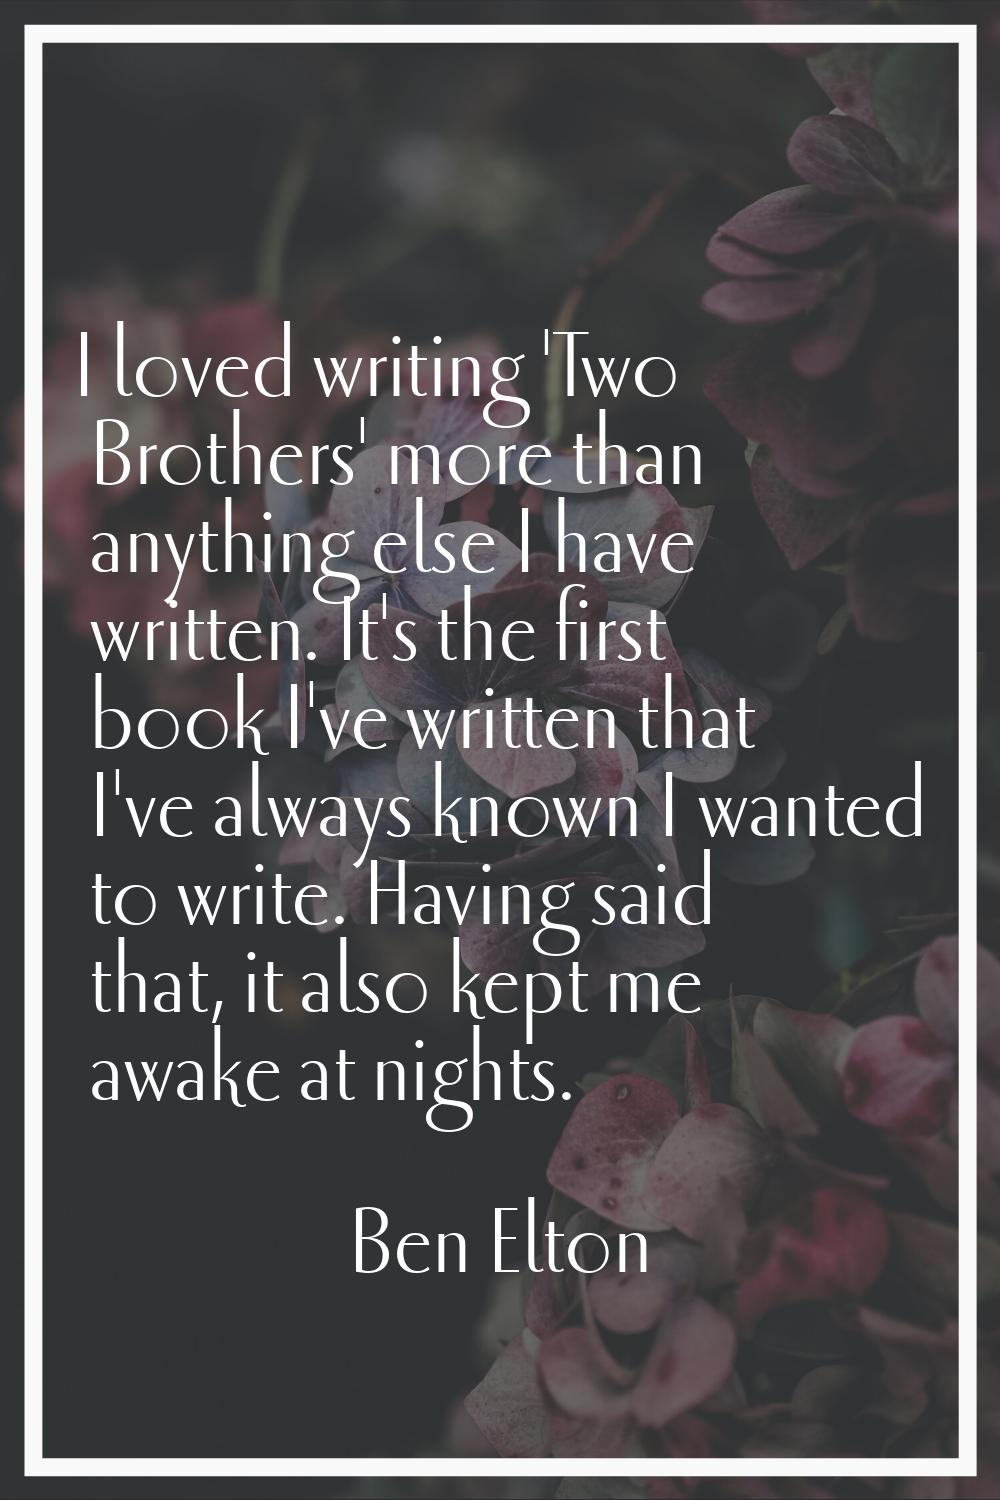 I loved writing 'Two Brothers' more than anything else I have written. It's the first book I've wri